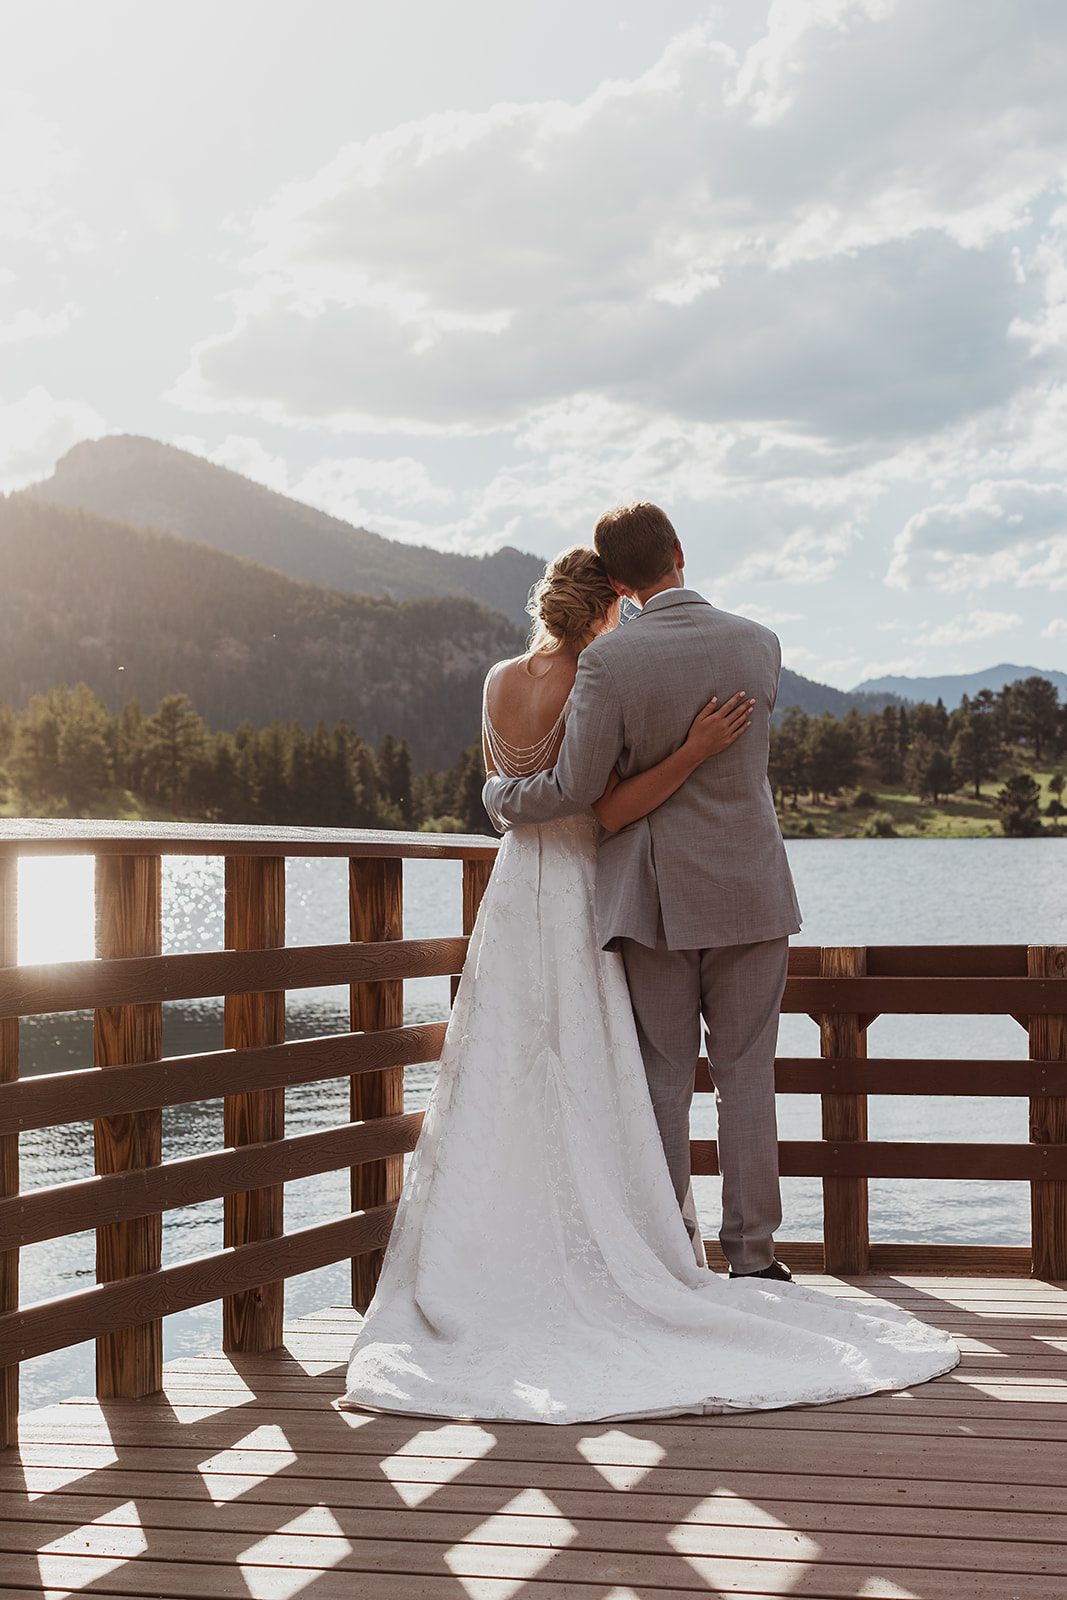 Bride and groom wedding portrait hugging on the bridge, overlooking a lake and mountains